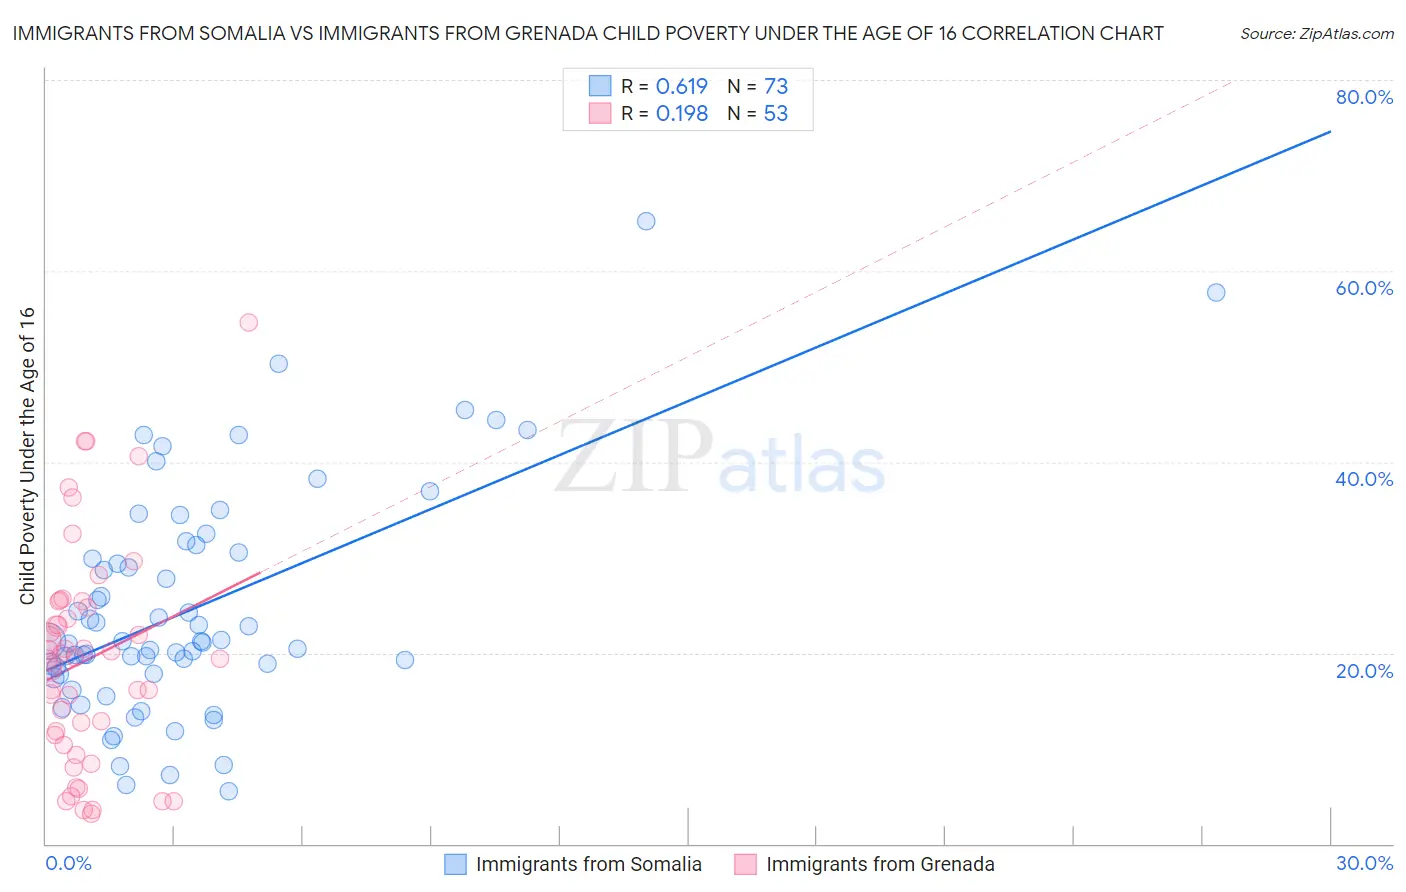 Immigrants from Somalia vs Immigrants from Grenada Child Poverty Under the Age of 16